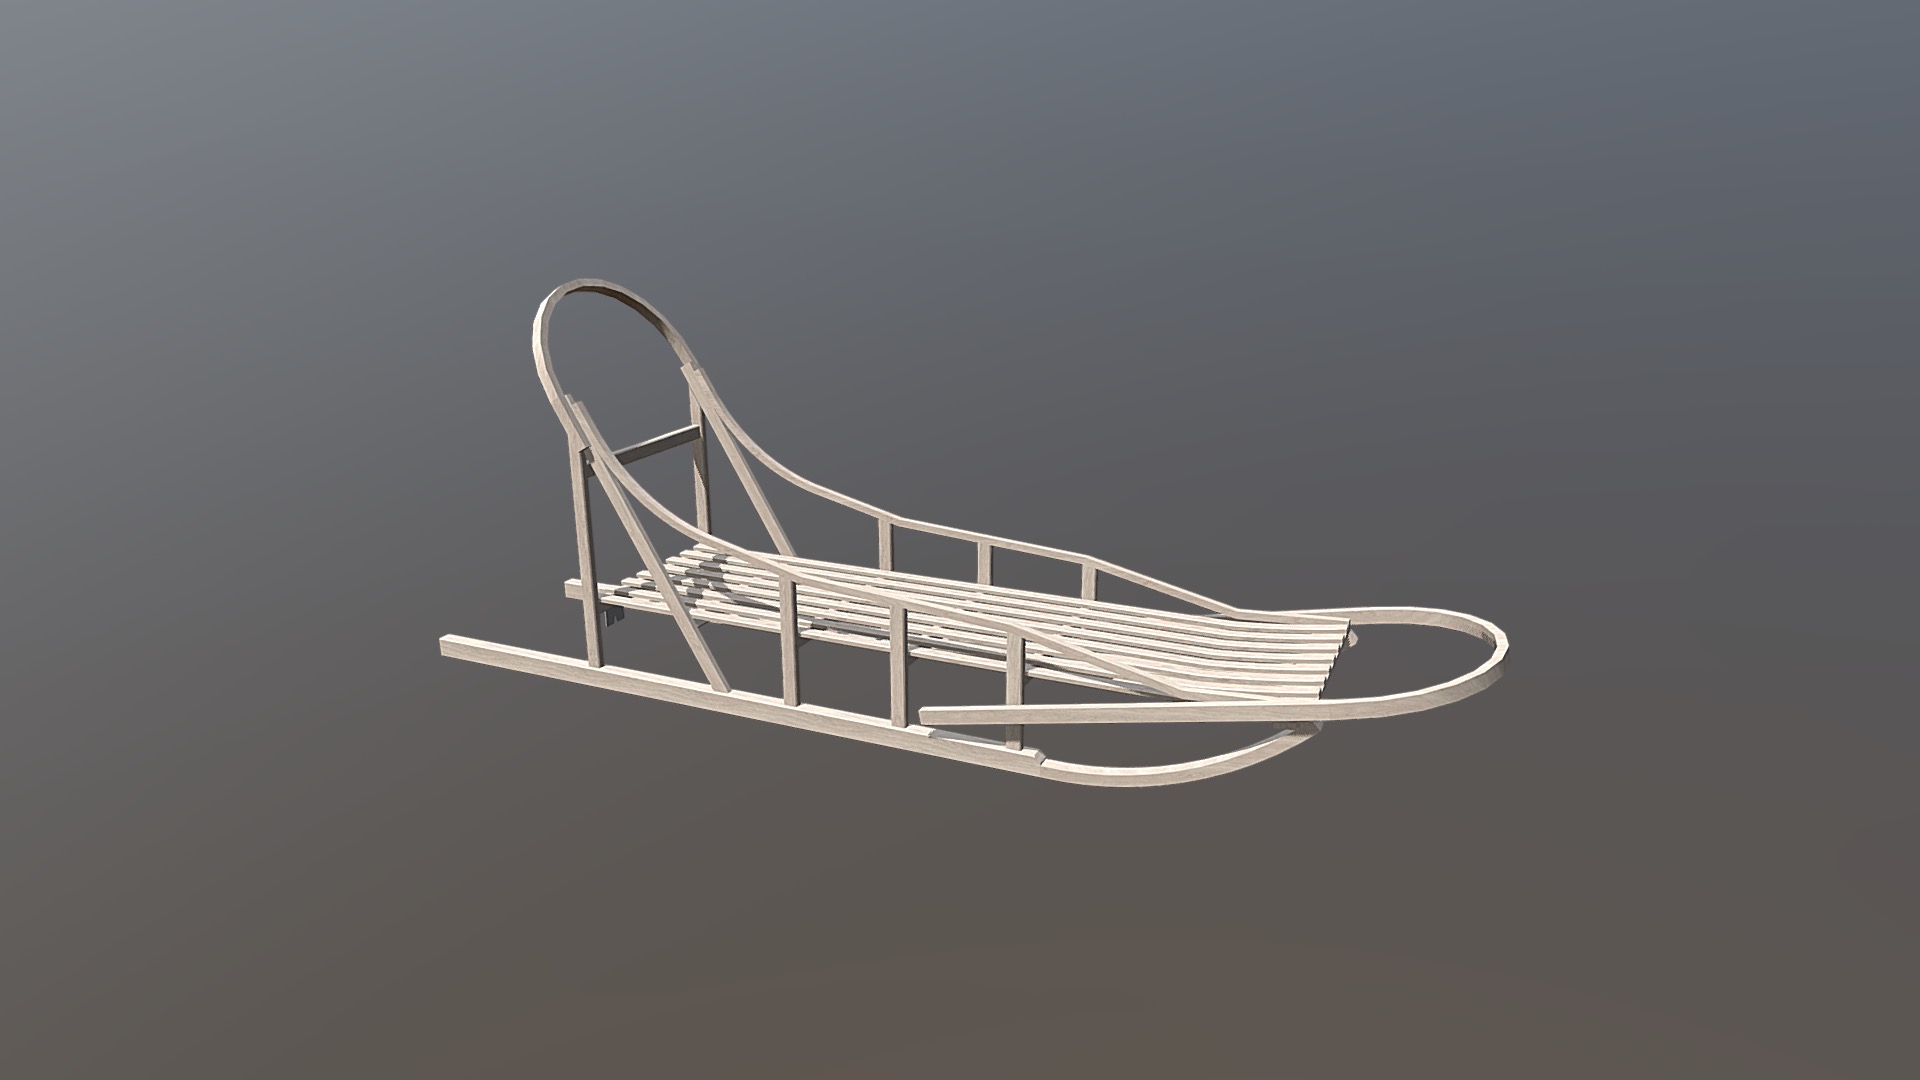 FREIGHT SLED - 3D model by EVAN SPENCE (@adftw) 3d model